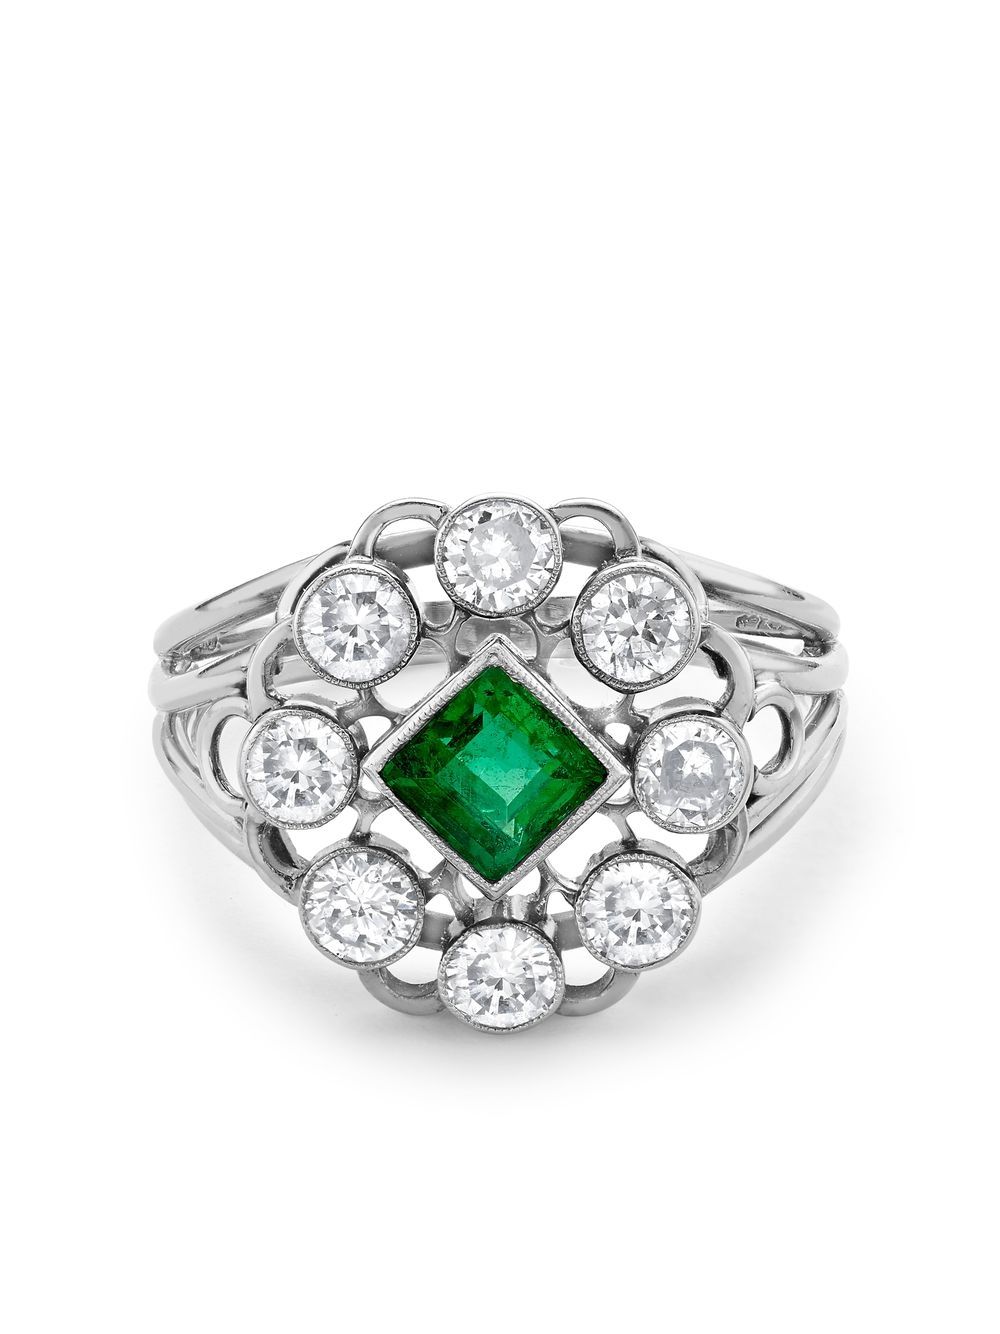 Pre-owned Pragnell Vintage Edwardian  Emerald And Diamond Ring In Silver